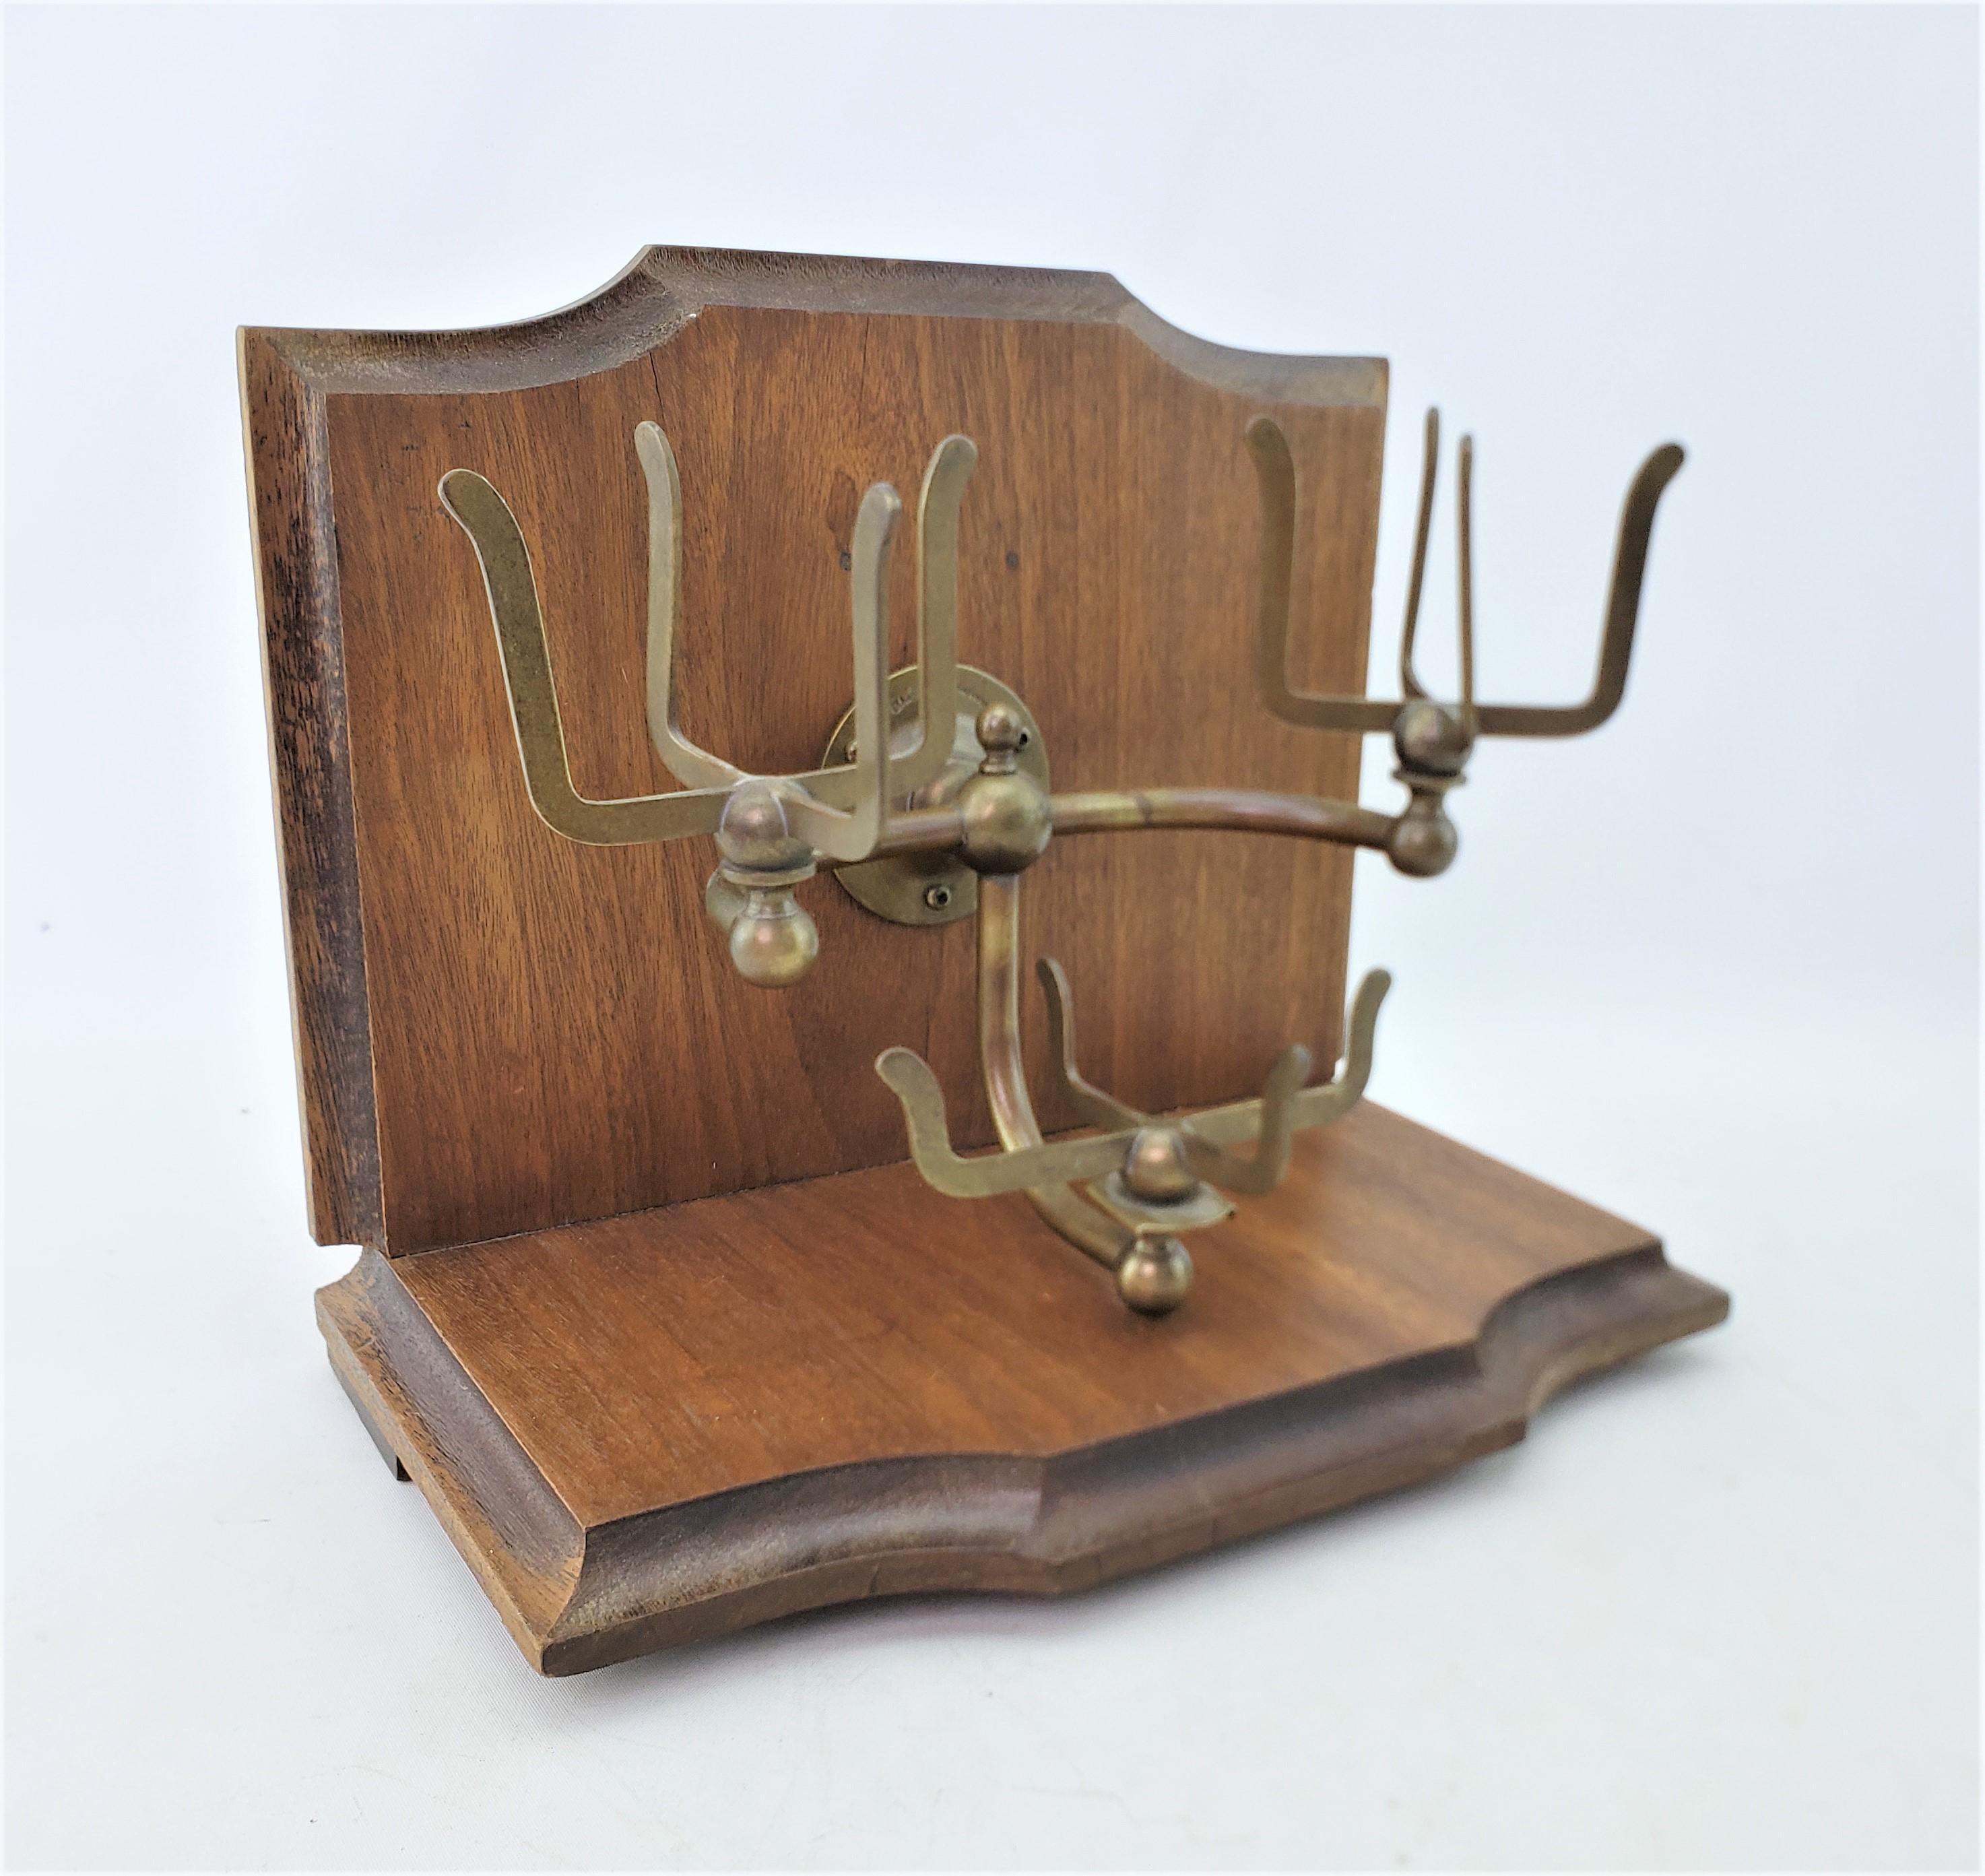 This antique bathroom fixture was made by the Brasscrafters of the United States and dates to approximately 1920 and done in the period Art Deco style. The fixture is composed of brass and has a sturdy wall mounting bracket with two prong cup